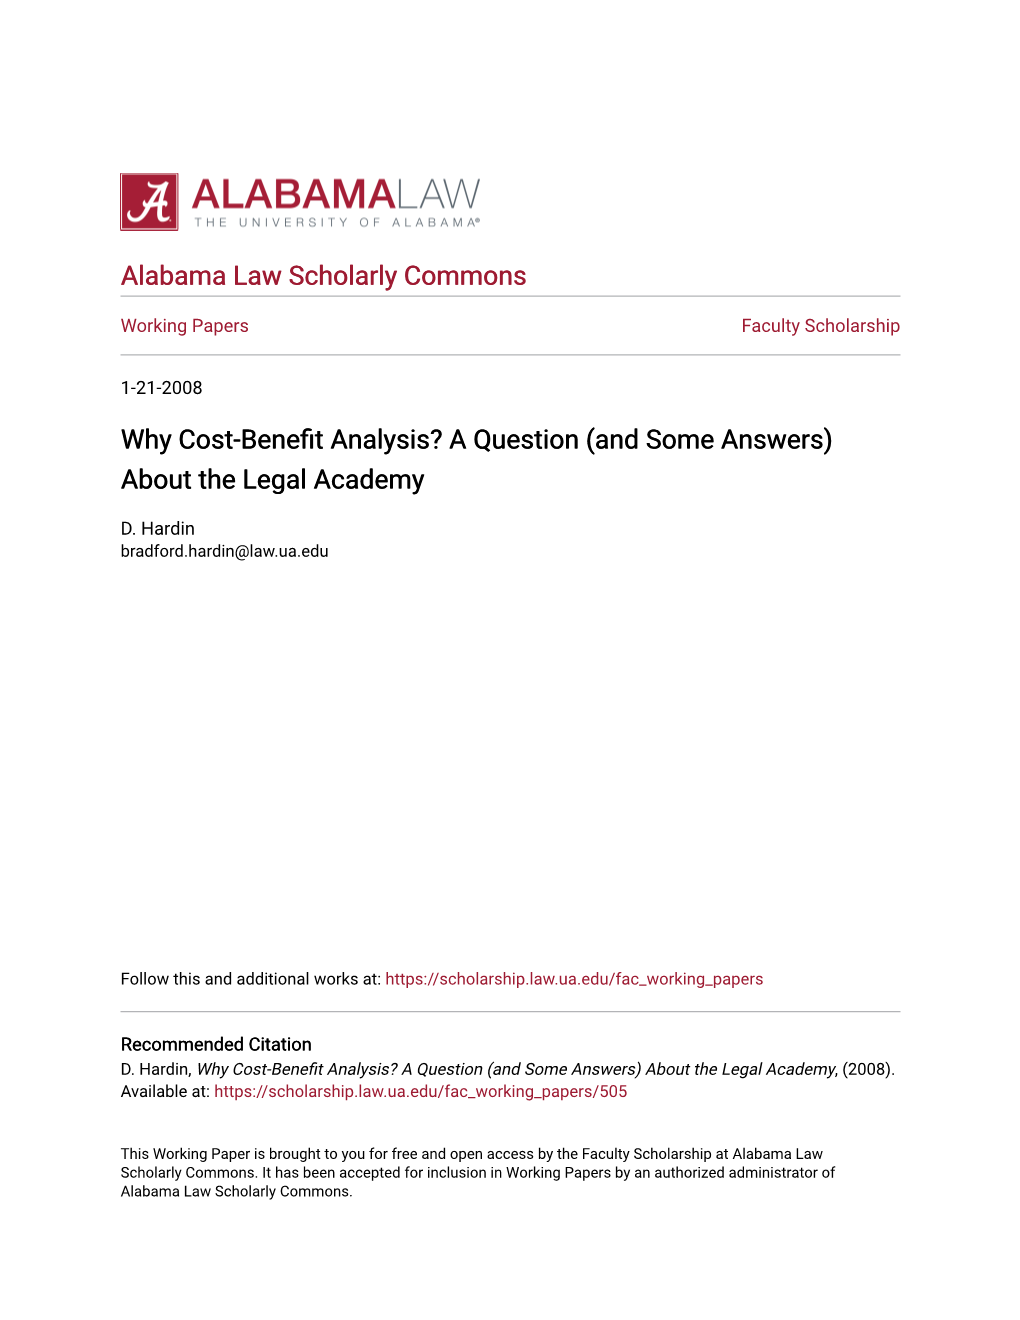 Why Cost-Benefit Analysis? a Question (And Some Answers) About the Legal Academy